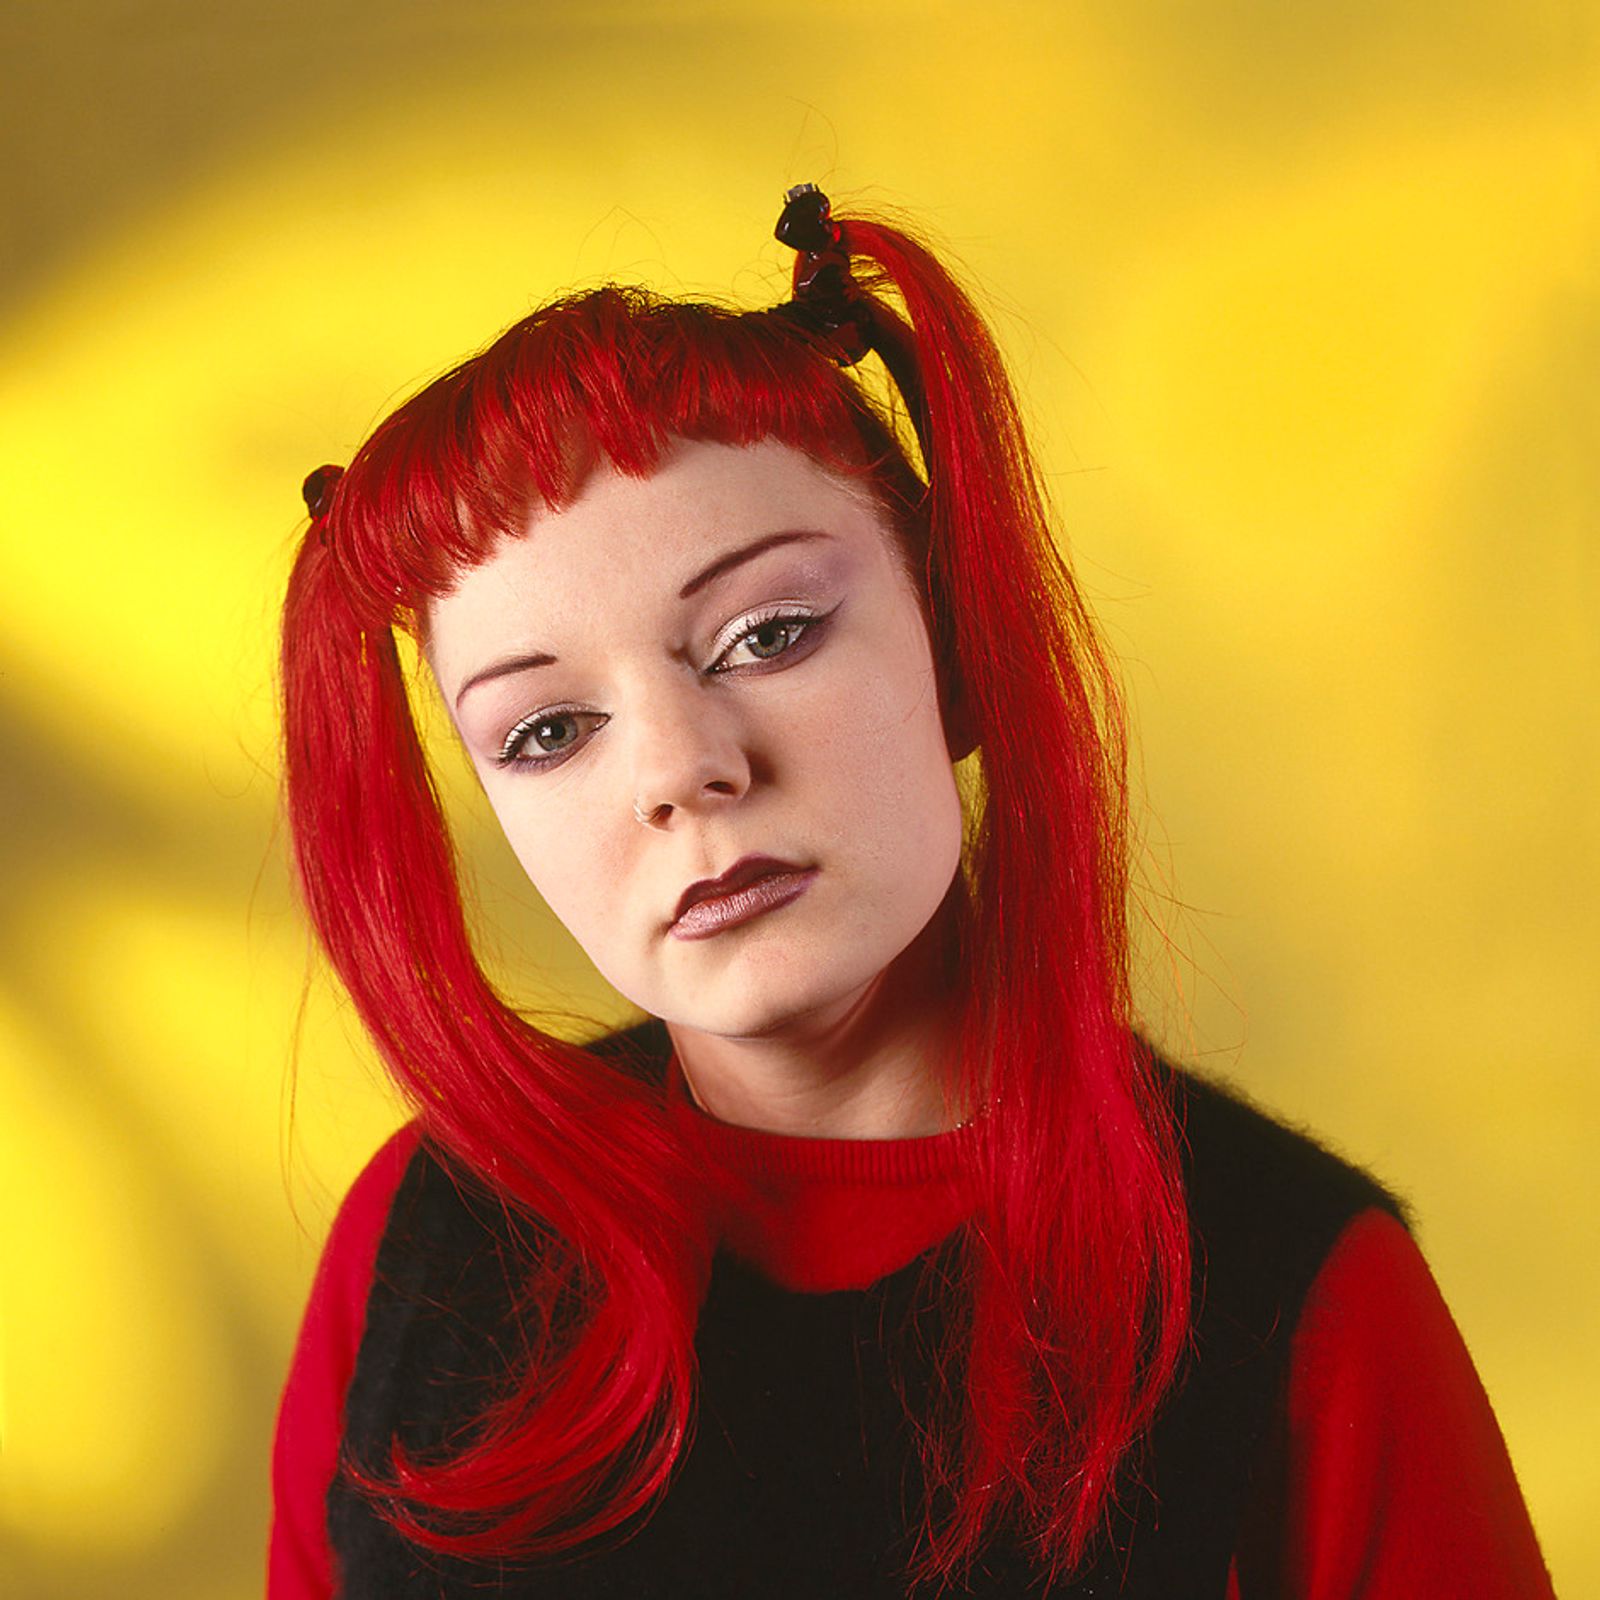 © Steven Edson - Young woman with bright red hair against a yellow background